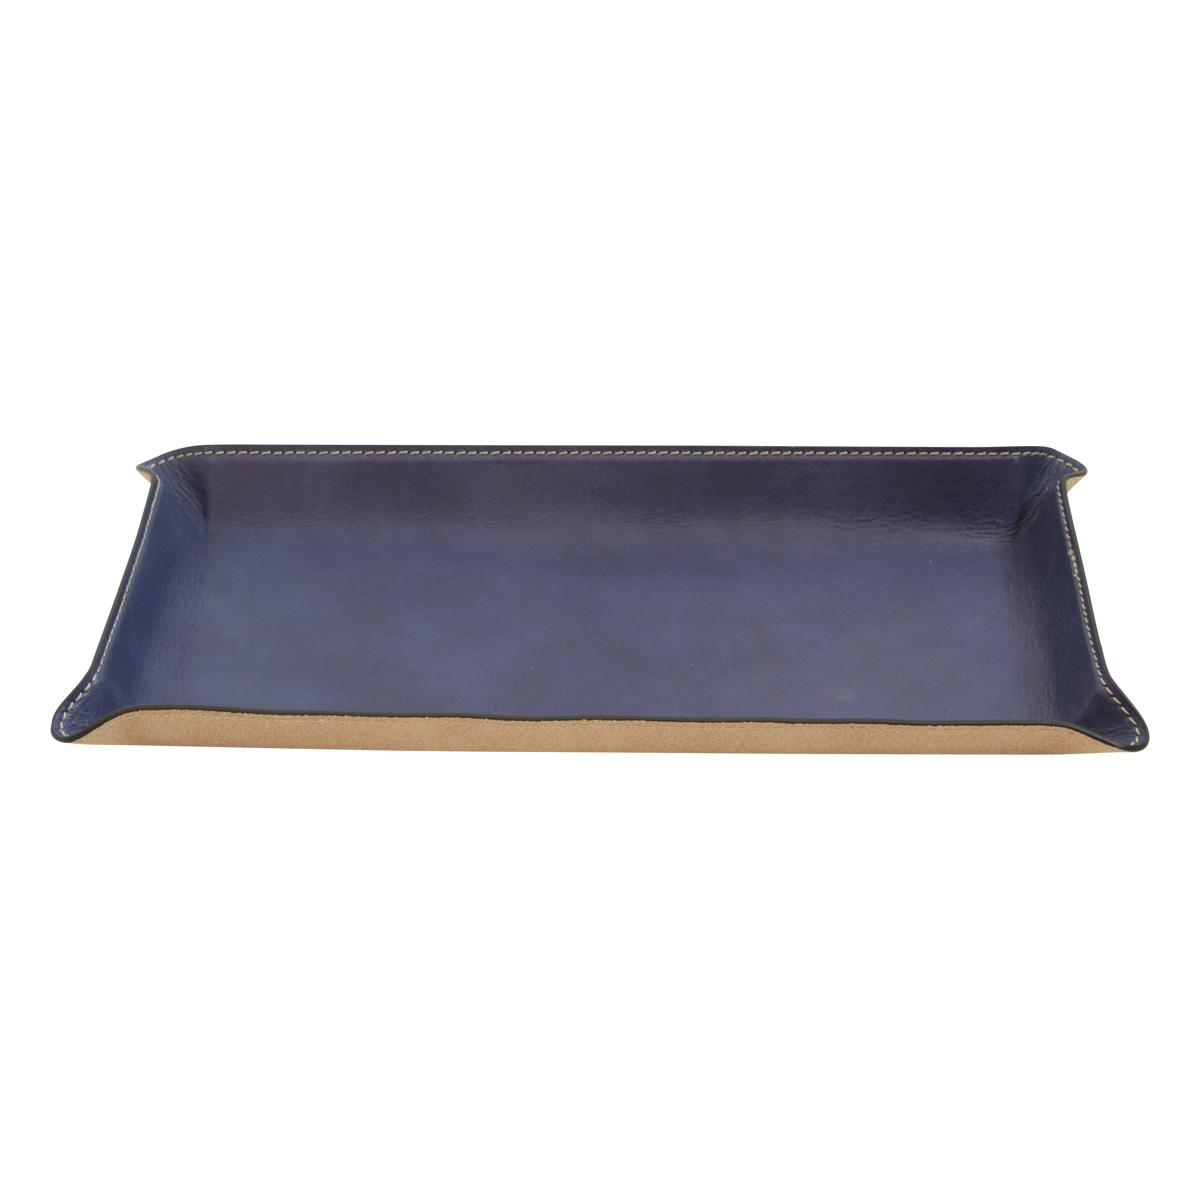 Leather desk tray  | 762089CB US | Old Angler Firenze